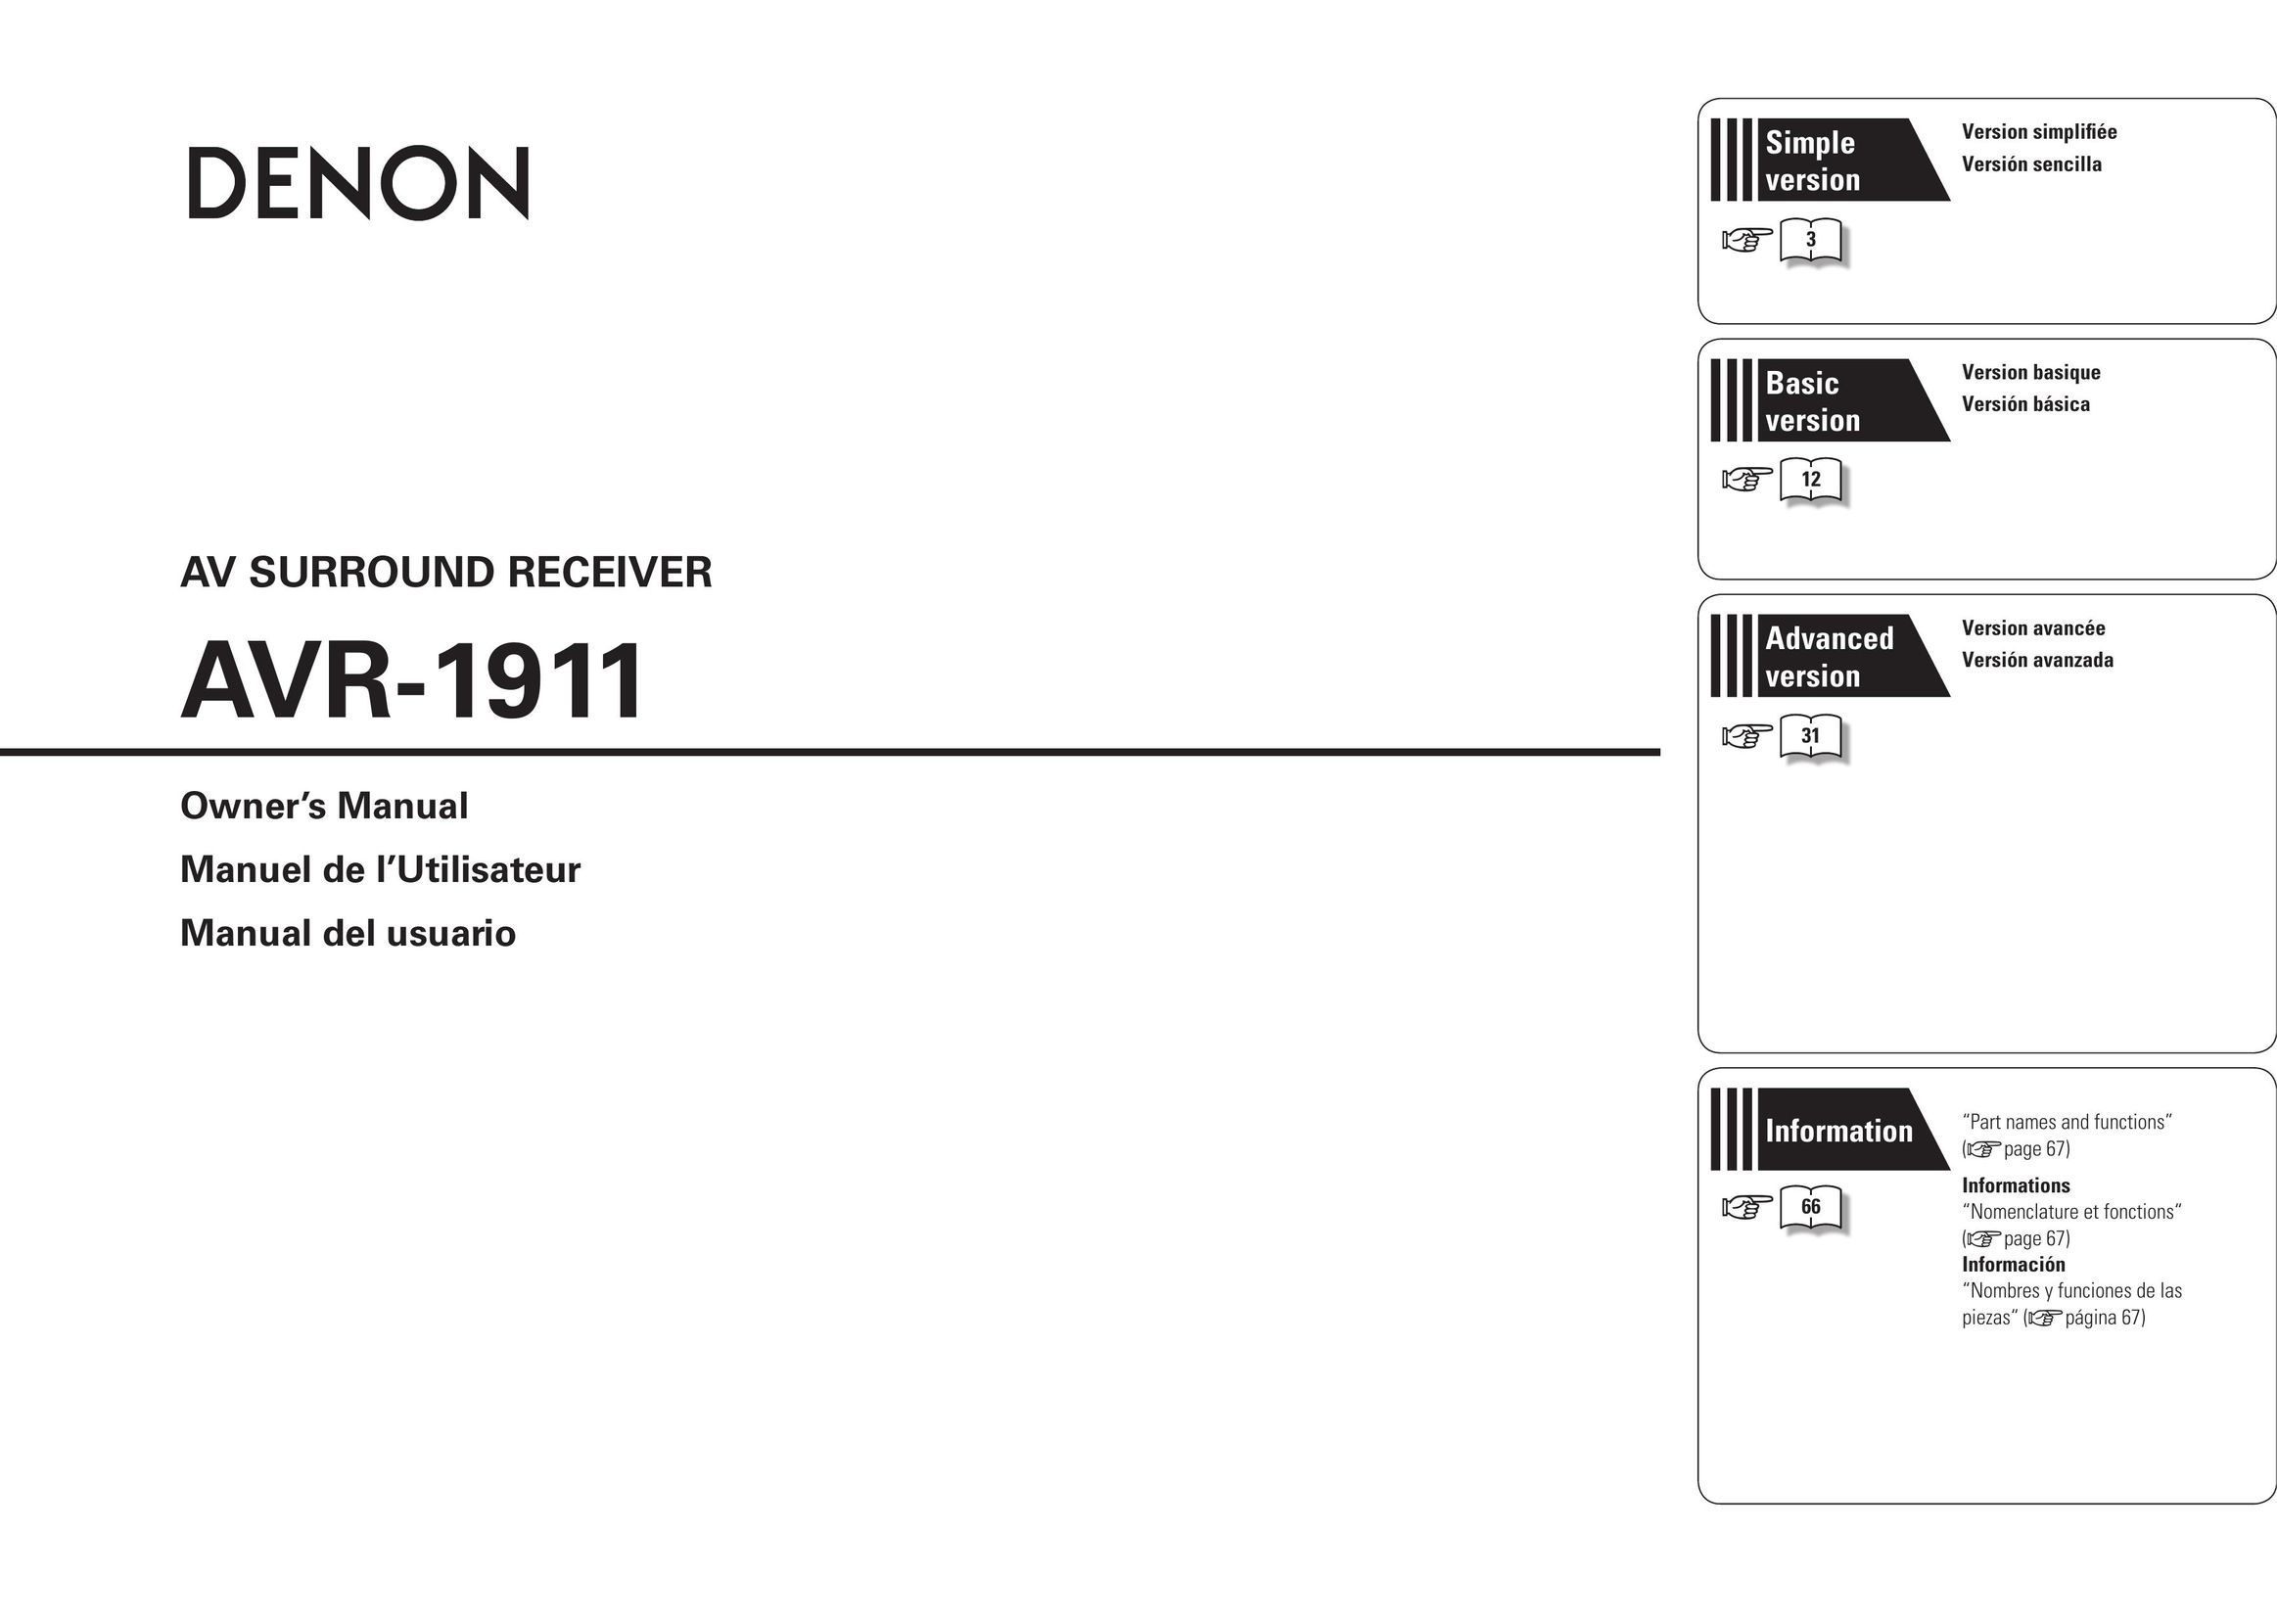 Denon AVR-1911 Home Theater System User Manual